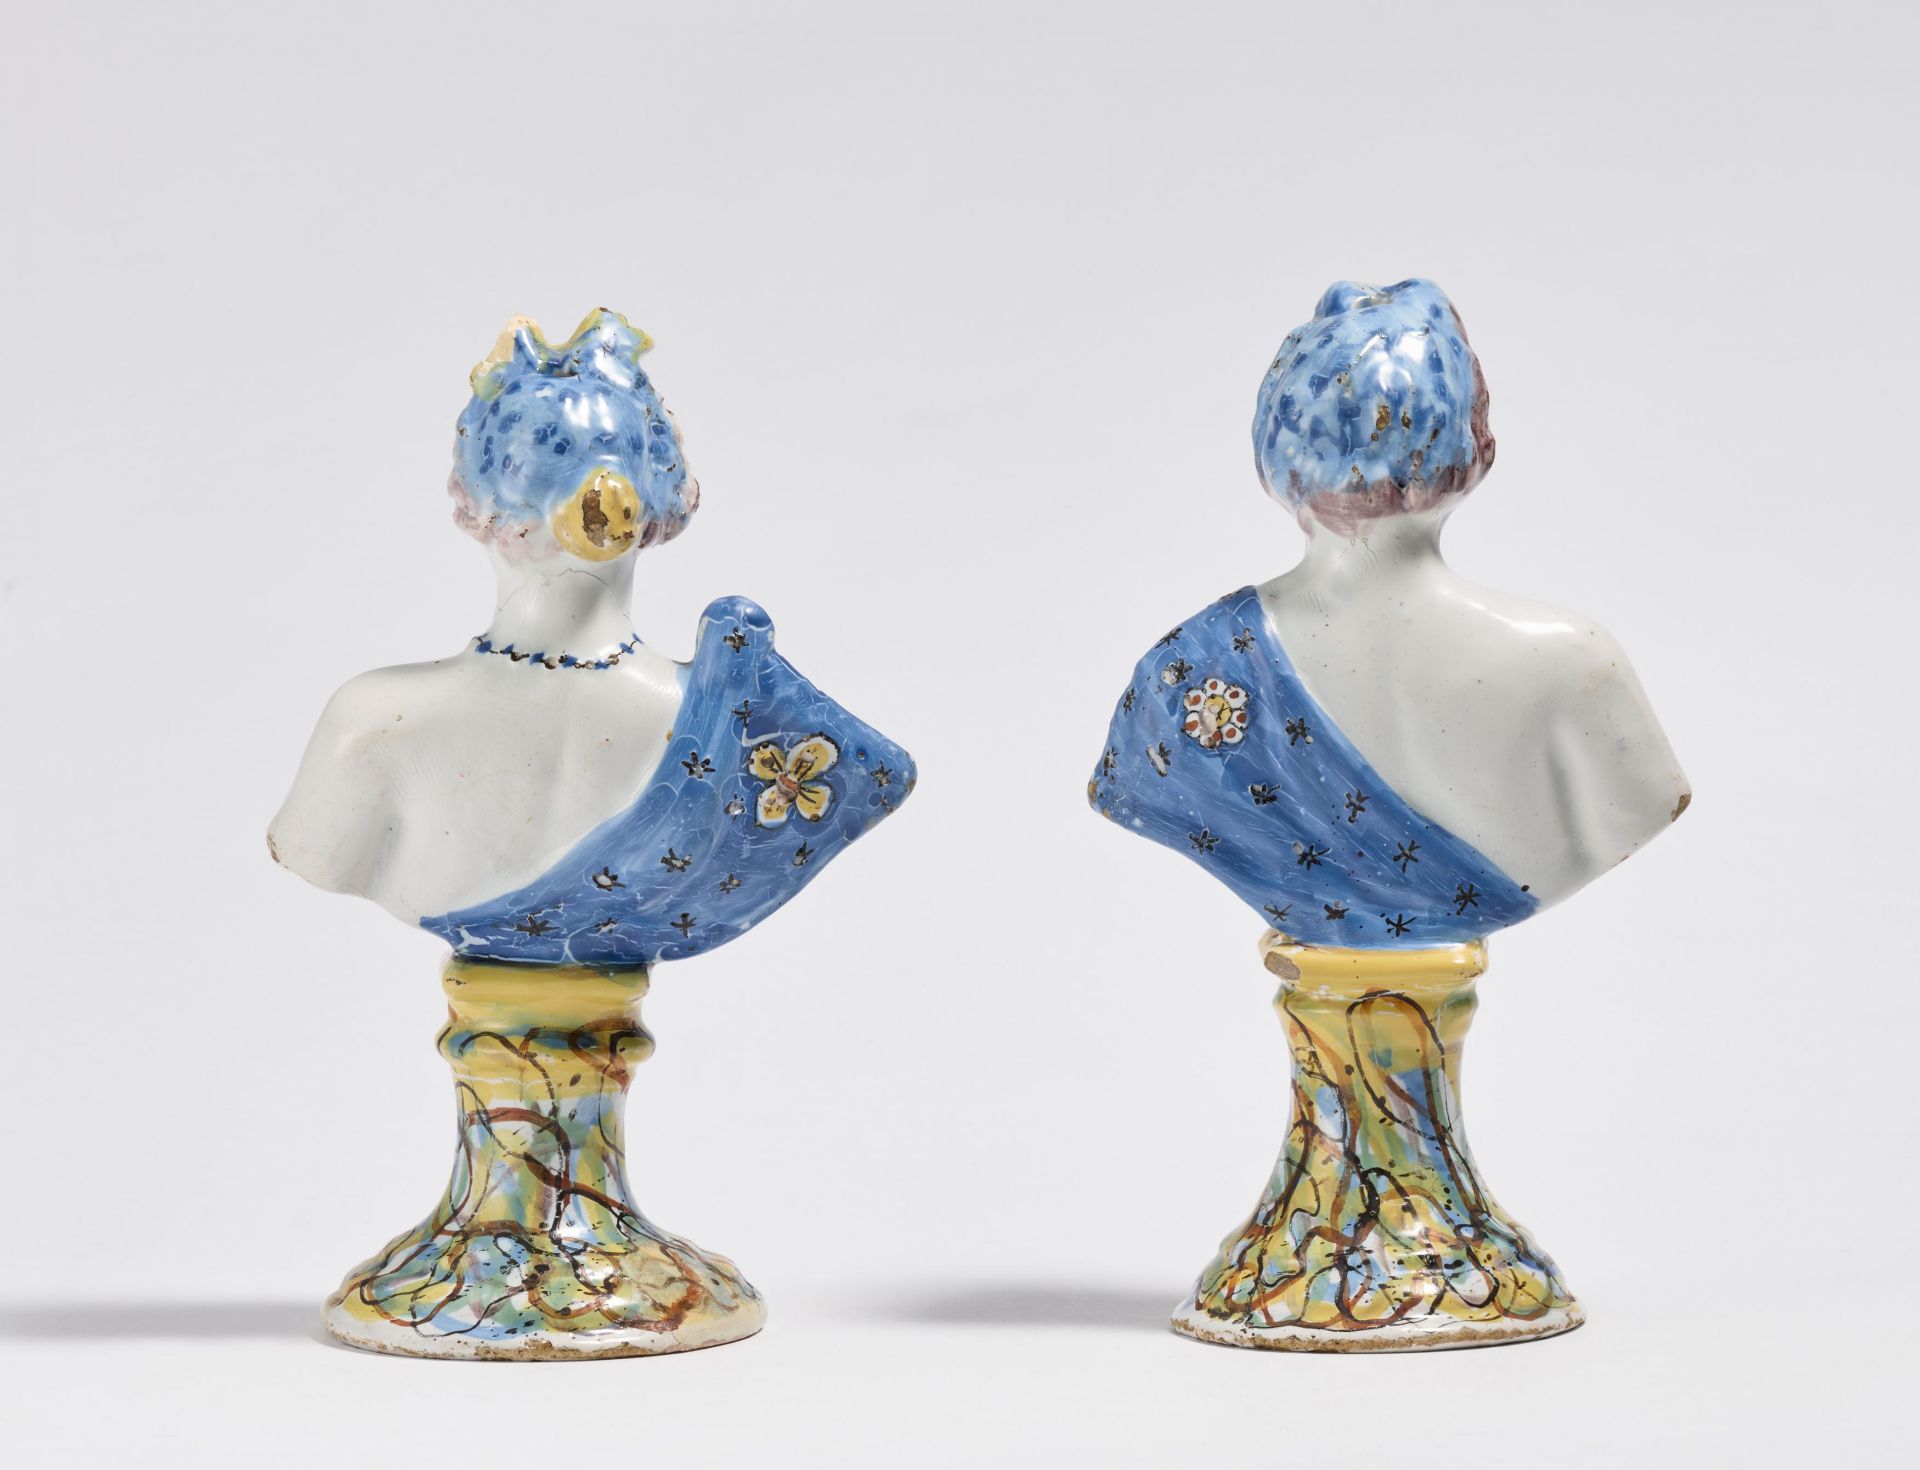 Small bust of man and woman in antique robes - Image 2 of 2